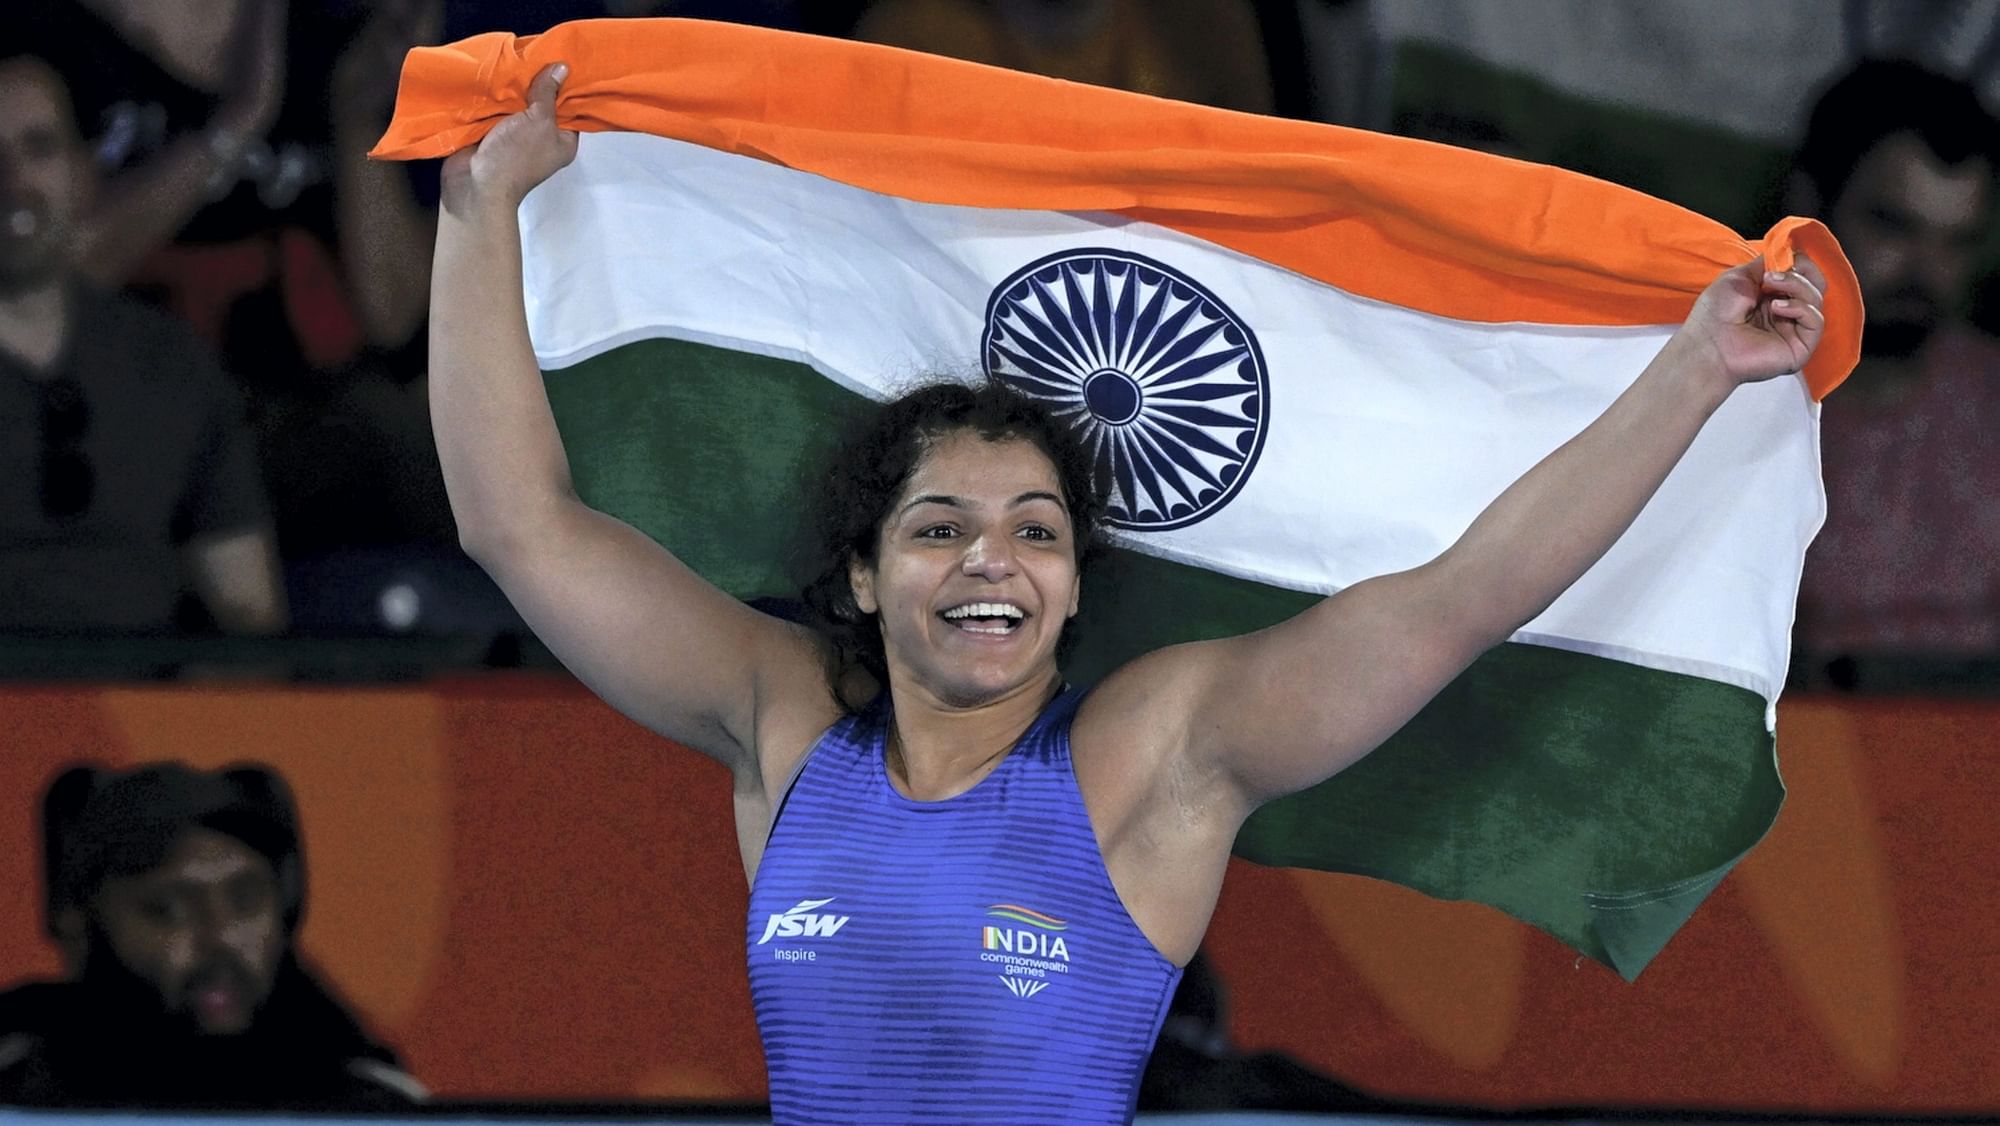 <div class="paragraphs"><p>Malik on Friday, 5 August, won her maiden CWG gold, defeating Canada's Ana Paula Godinez Gonzalez and winning 'by fall' in the women's 62kg wrestling final.</p></div>